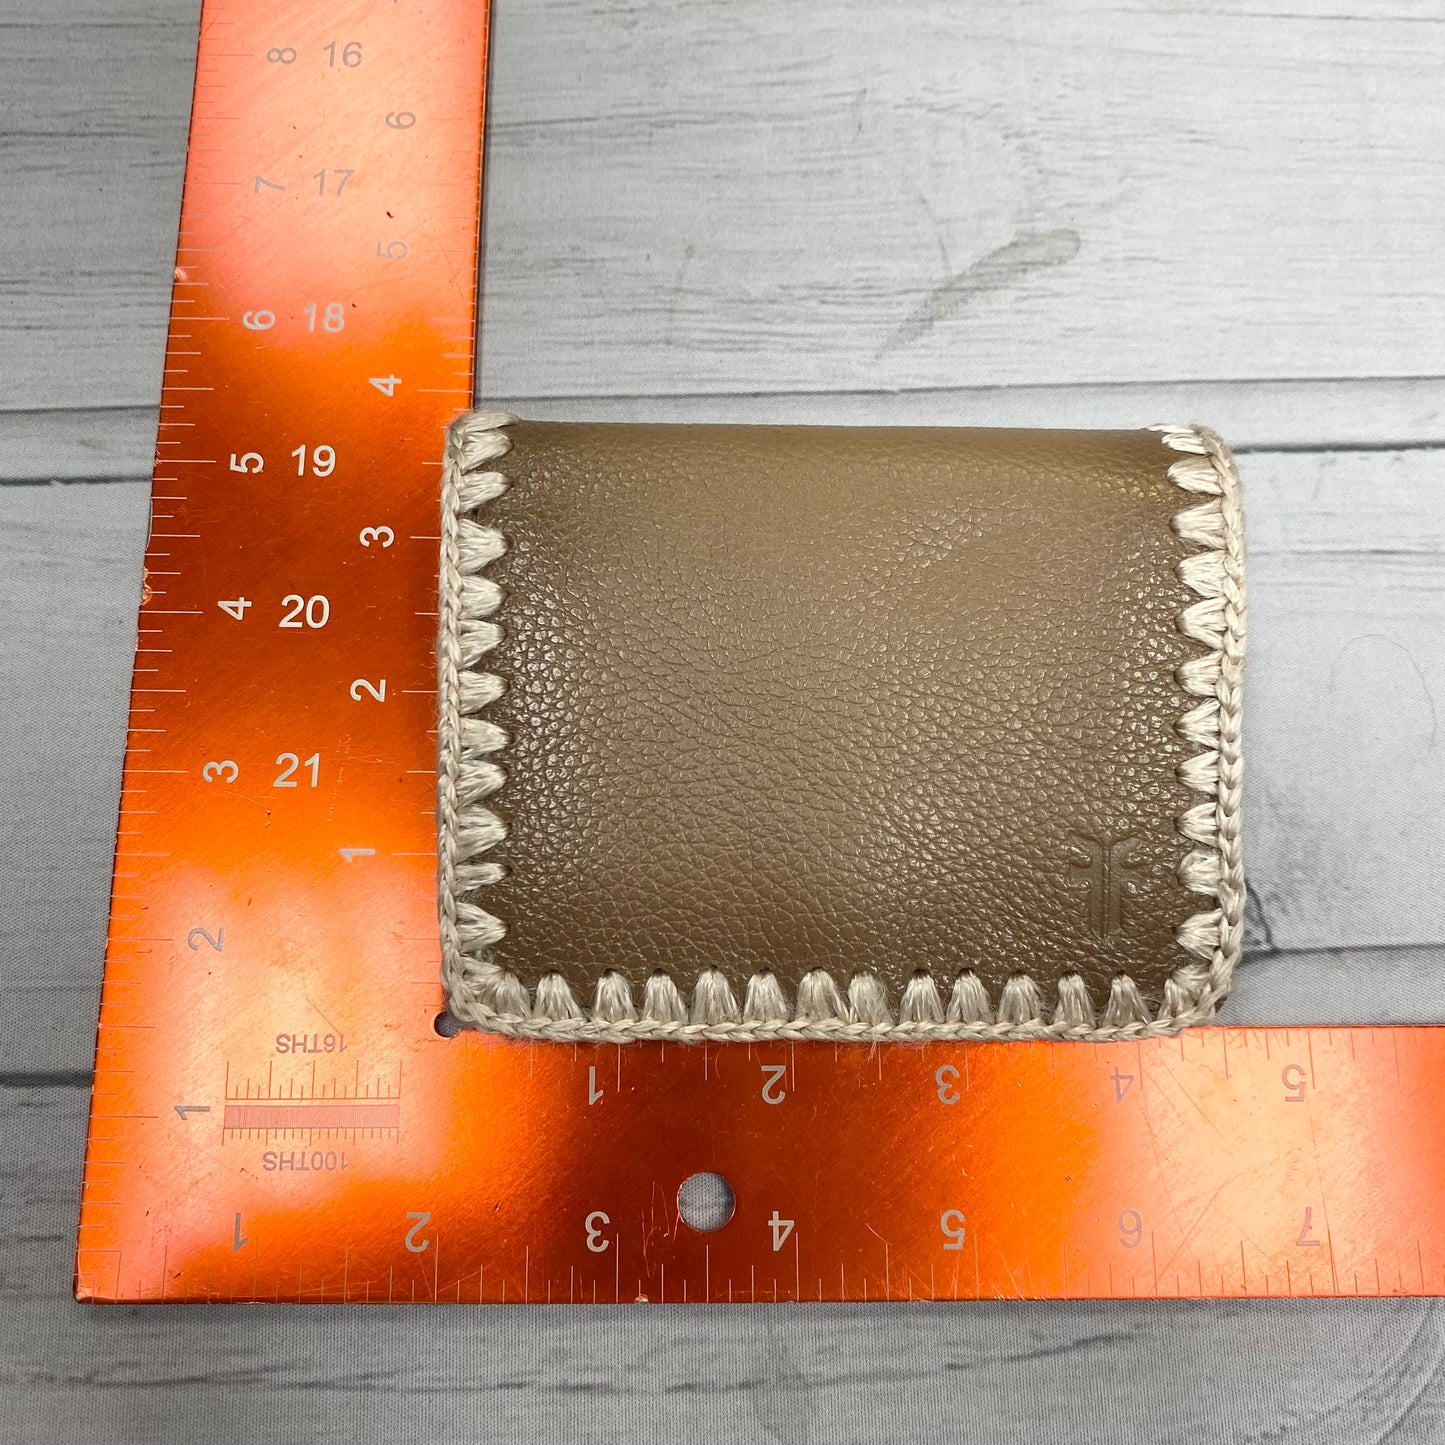 Wallet Designer By Frye  Size: Small